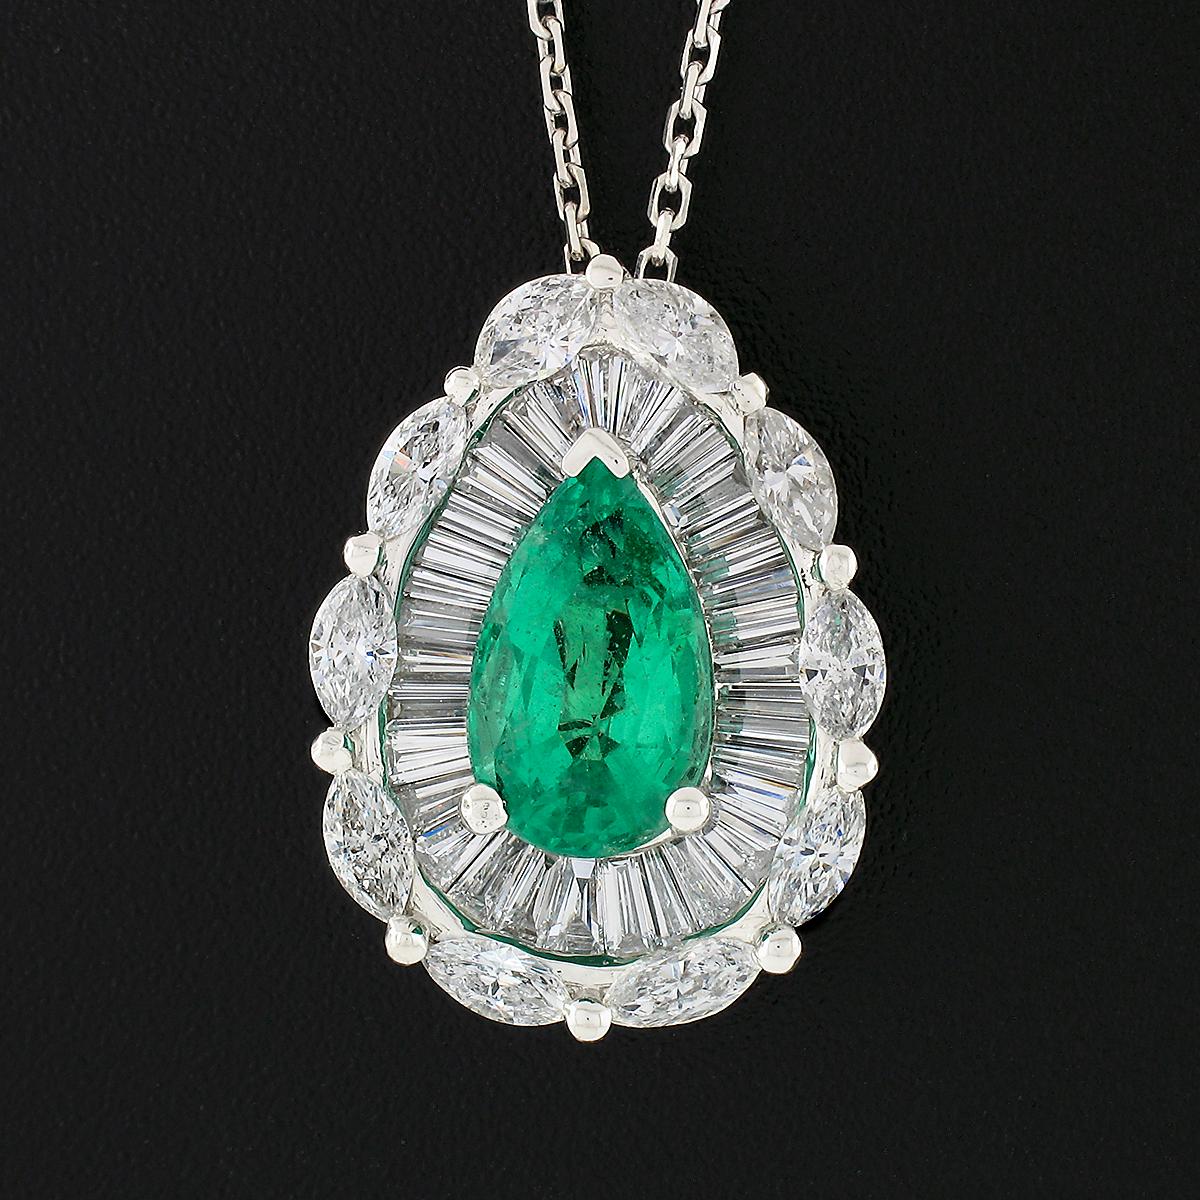 Here we have a truly fancy emerald and diamond teardrop pendant crafted in solid 18k white gold. The pendant features a breathtaking, approximately 2.30 carats, GIA certified natural emerald stone displaying the most attractive and happy vivid green